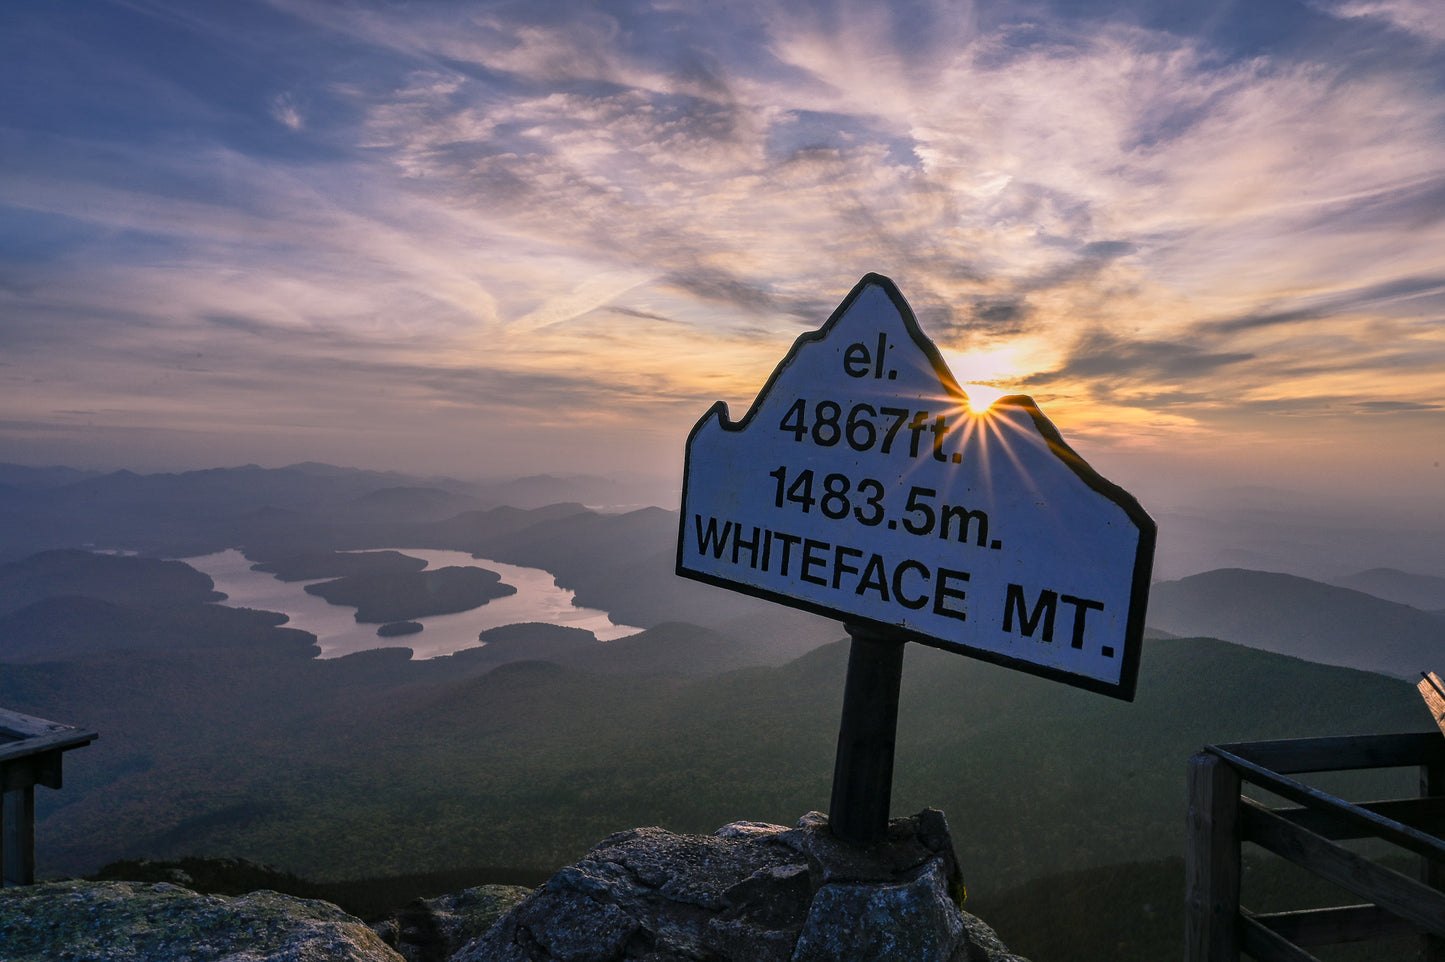 Peak Sunset Views from Whiteface Mountain